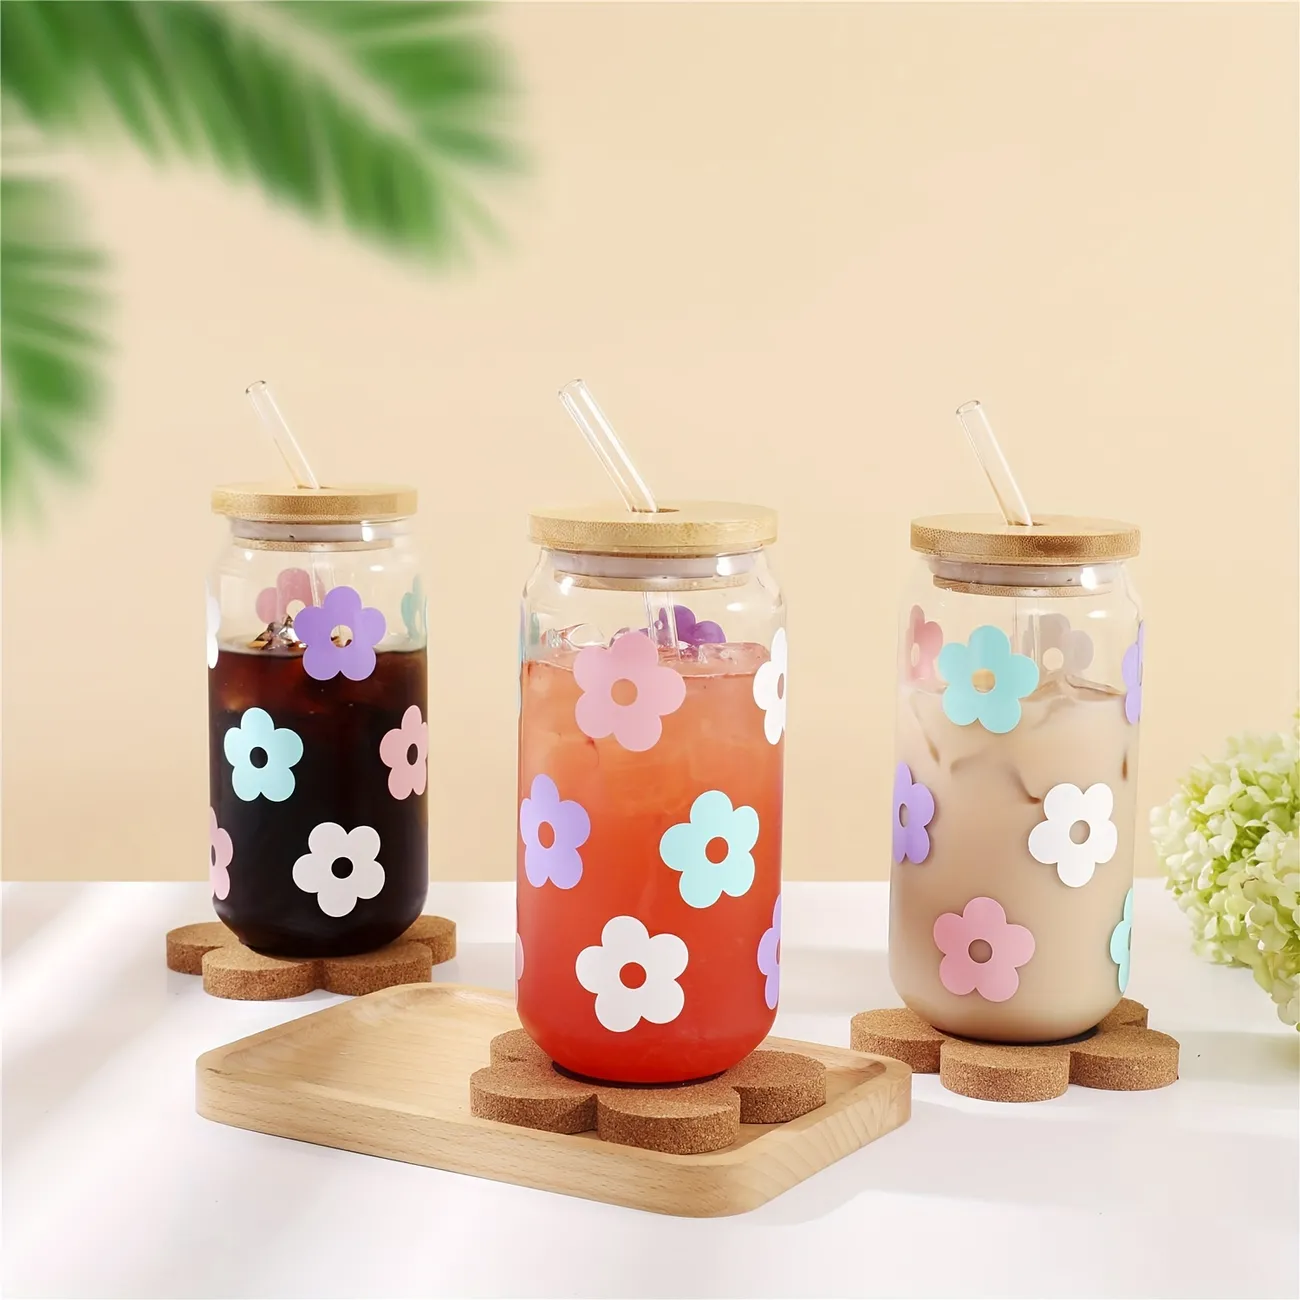 1 Set 16oz Retro Flower Can-shaped Glass Tumbler With Bamboo Lid, Straw, And Cleaning Brush - Daisy Pattern Soda Can Cup For Drinkware And Glassware